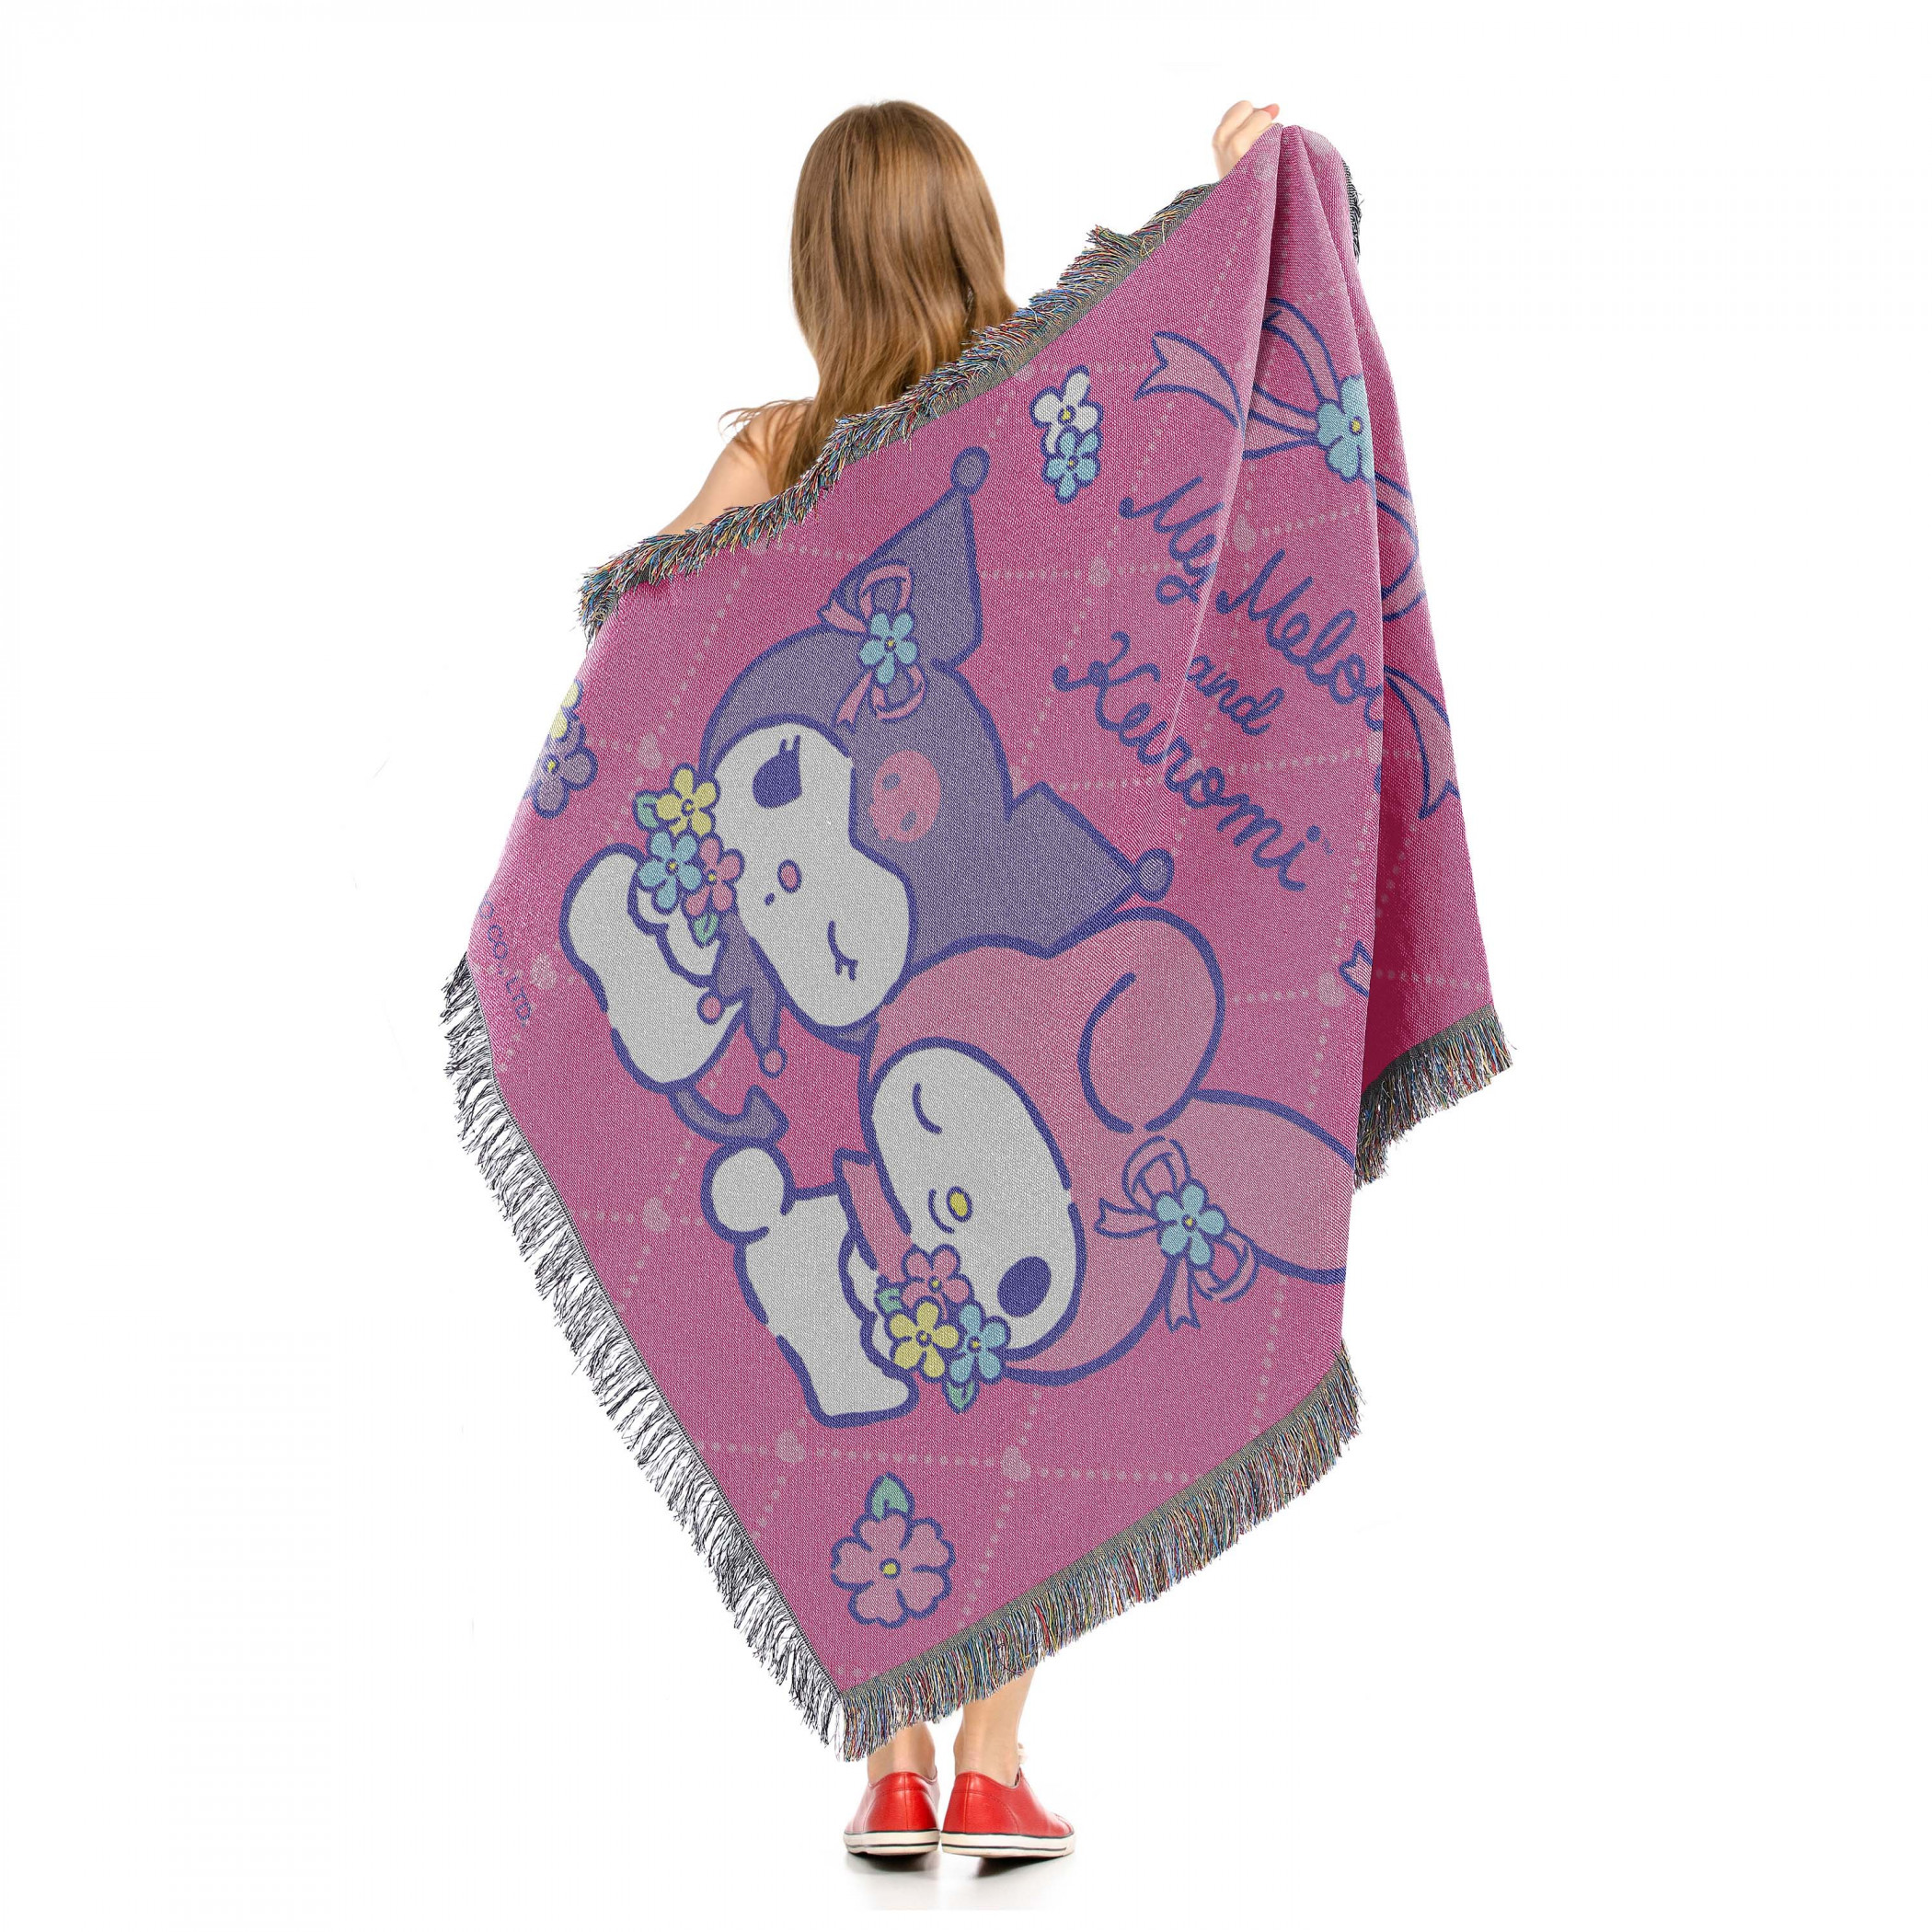 Sanrio Kuromi & My Melody Opposites Attract Tapestry Throw Blanket 48"x60"